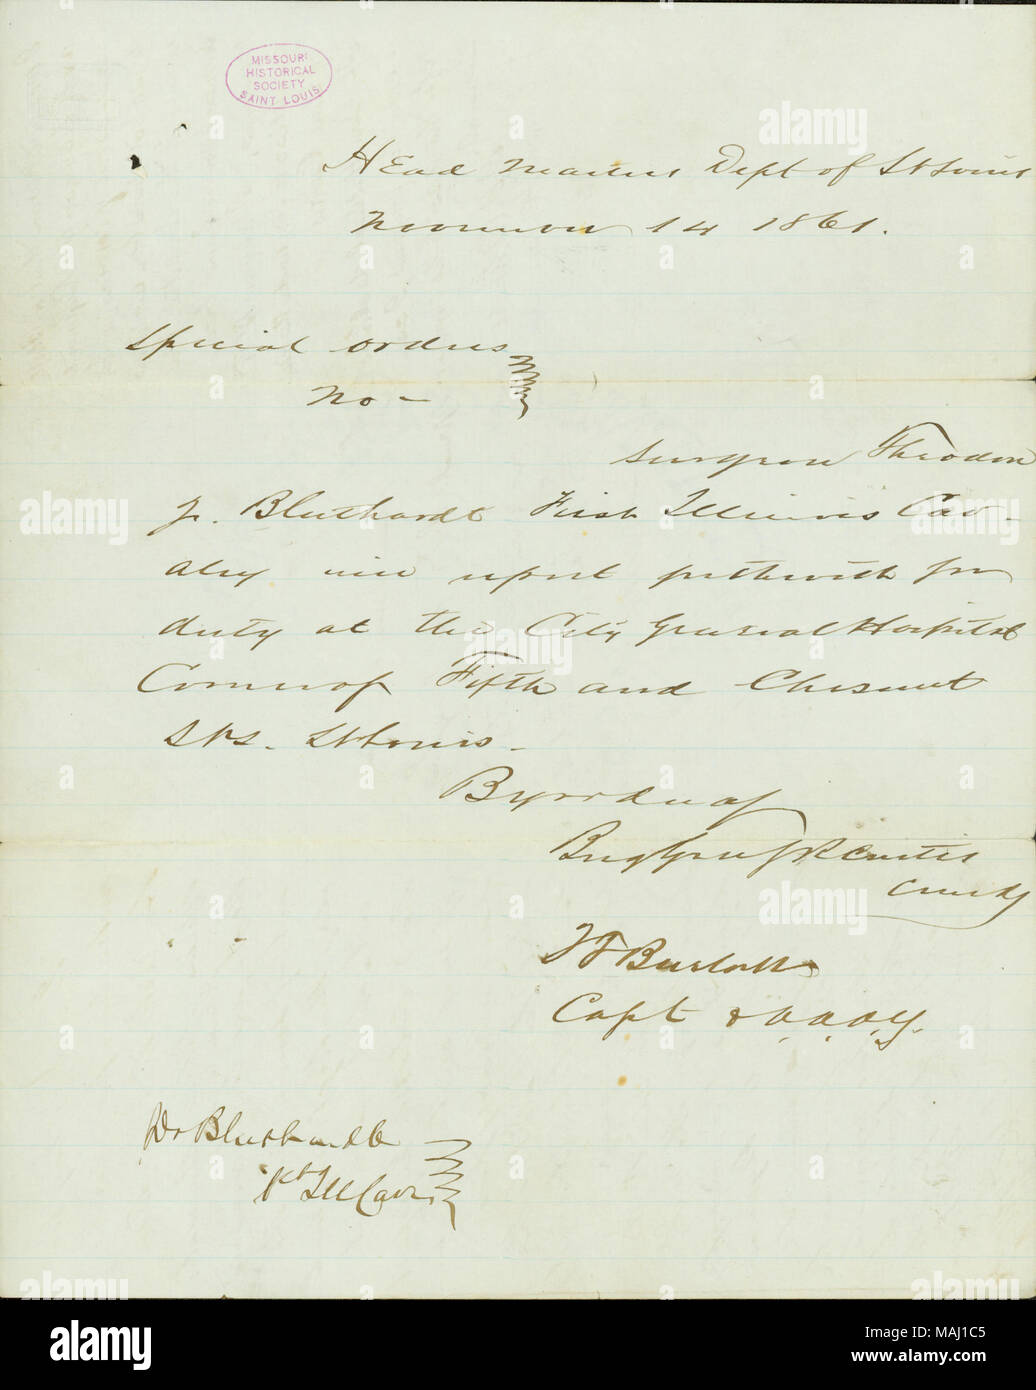 State that Theodore J. Bluthardt must report to duty at the hospital on the corner of Fifth and Chestnut in St. Louis. On the verso are notes from multiple authors regarding payment for Bluthardt.  Transcription: Head Quarters Dept of St Louis November 14 1861. Special Orders No  ? Surgeon Theodore J. Bluthardt First Illinois Cavalry in report forthwith for duty at the City General Hospital Corner of Fifth and Chesnut[Chestnut] Sts. St Louis. By order of Brig Gen S R Curtis[Samuel R. Curtis] Comdg J T Burton Capt [and] A.A.A.J. Dr. Bluthardt 1st Ill Cav. [on reverse] [first column] I was not a Stock Photo